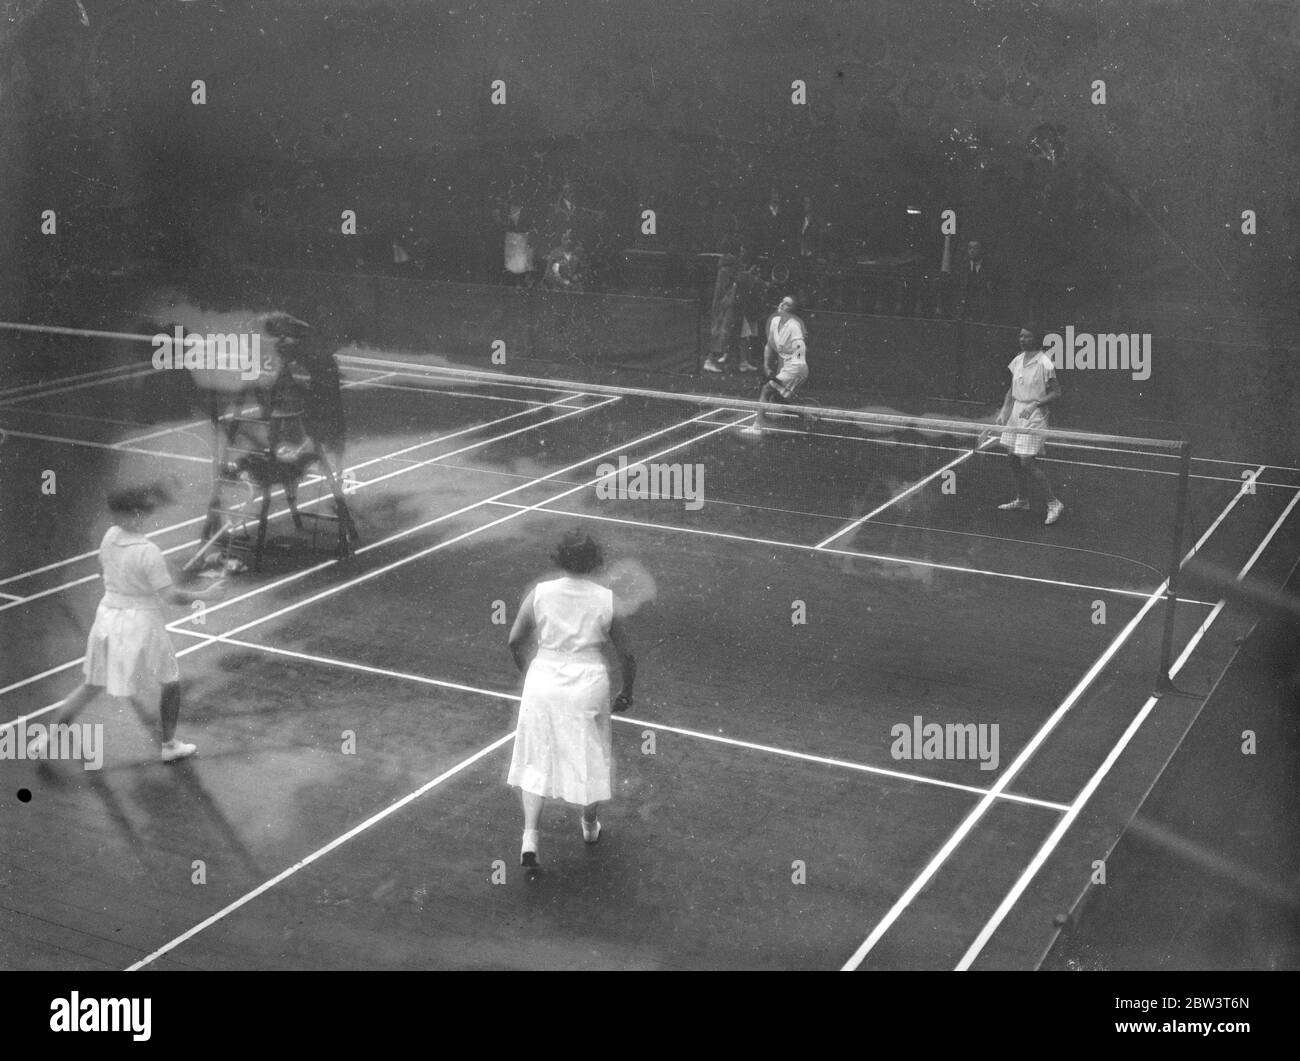 All England badminton championship at Horticural Hall . All England Badminton championships are opened at the Royal Horticultural Hall , Westminster. Photo shows a general view of play . 2 March 1936 Stock Photo